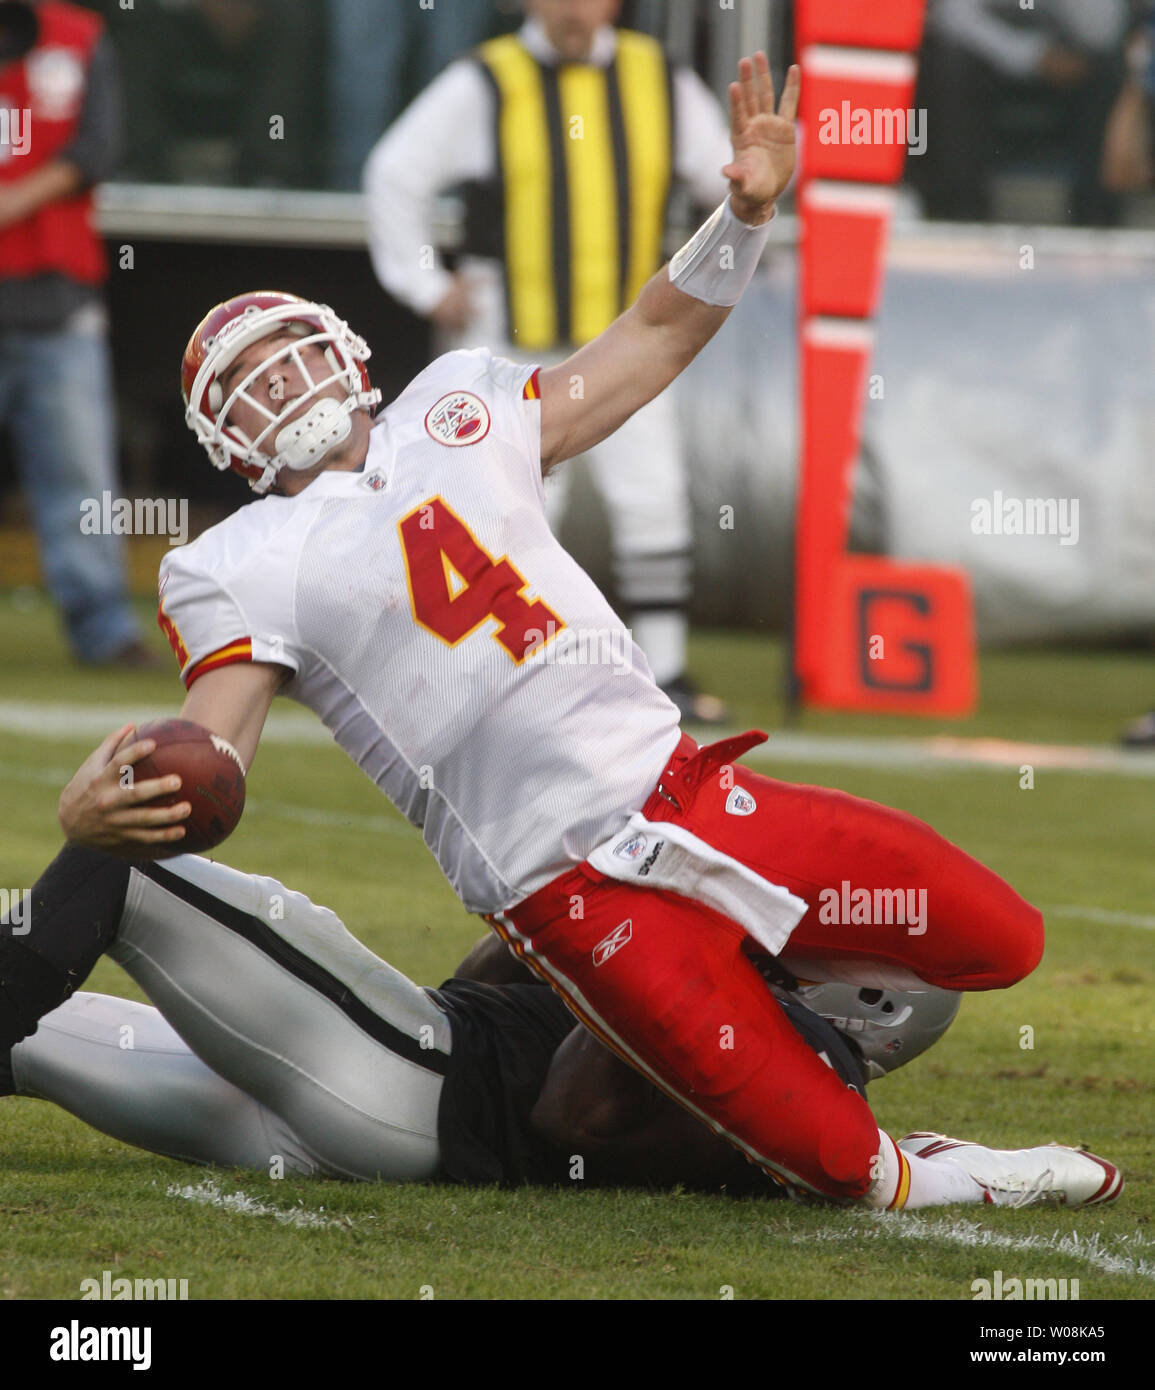 Kansas City Chiefs QB Tyler Thigpen (4) is spilled on a whistled play  against the Oakland Raiders in the third quarter at the Oakland Coliseum in Oakland, California on November 30, 2008. The Chiefs defeated the Raiders 20-13.   (UPI Photo/Terry Schmitt) Stock Photo